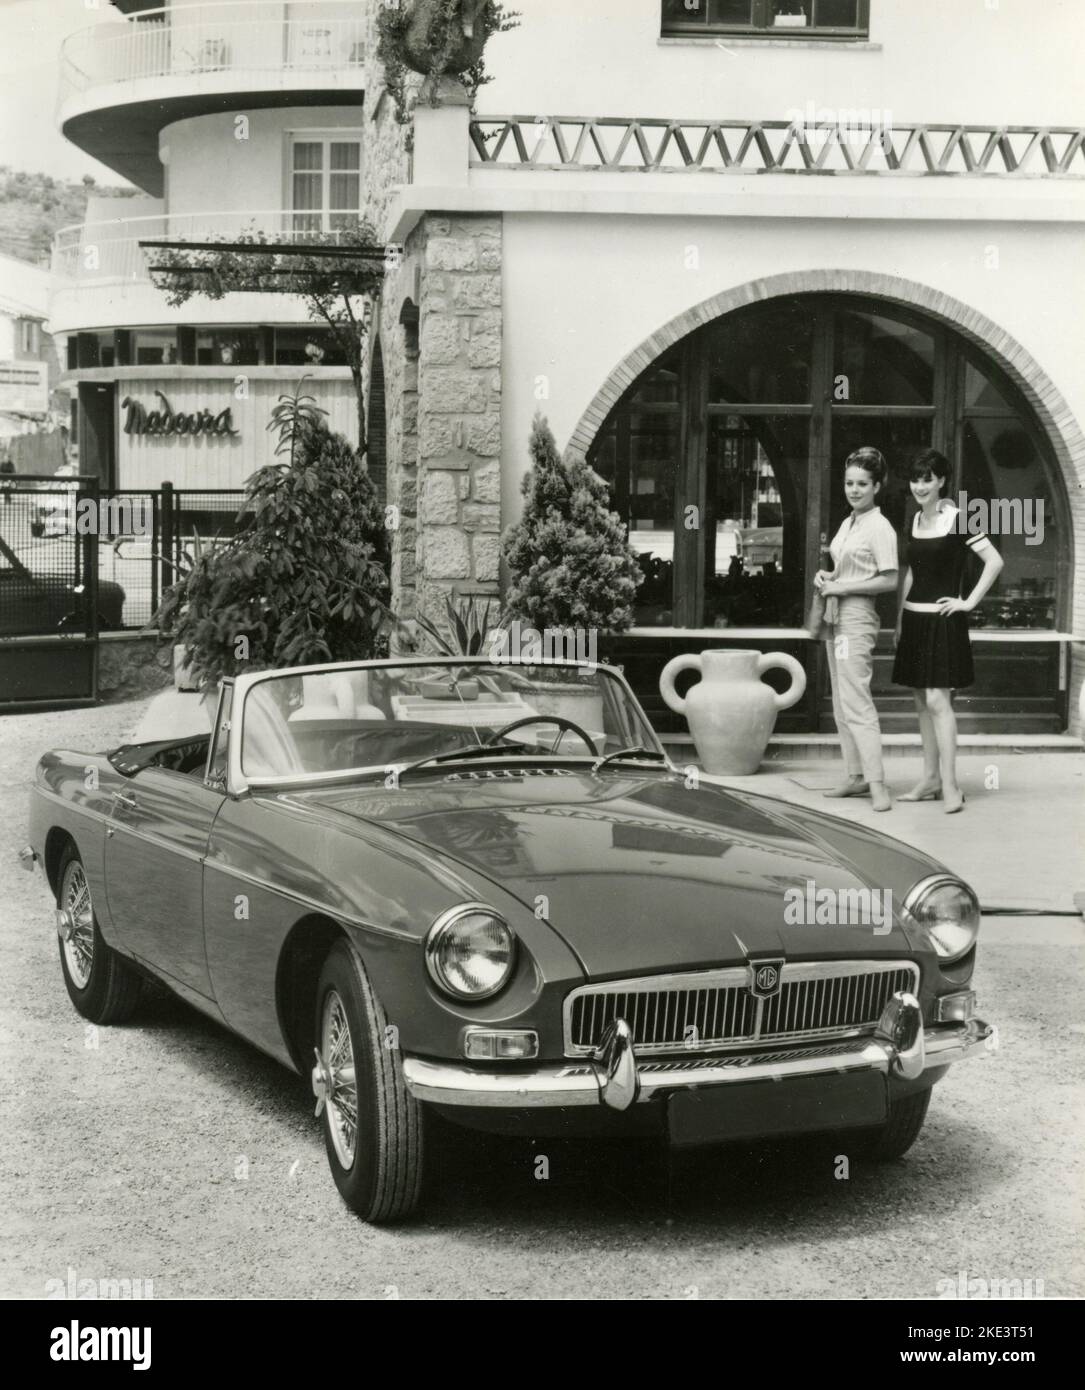 MG B Spider car, Royaume-Uni 1967 Banque D'Images